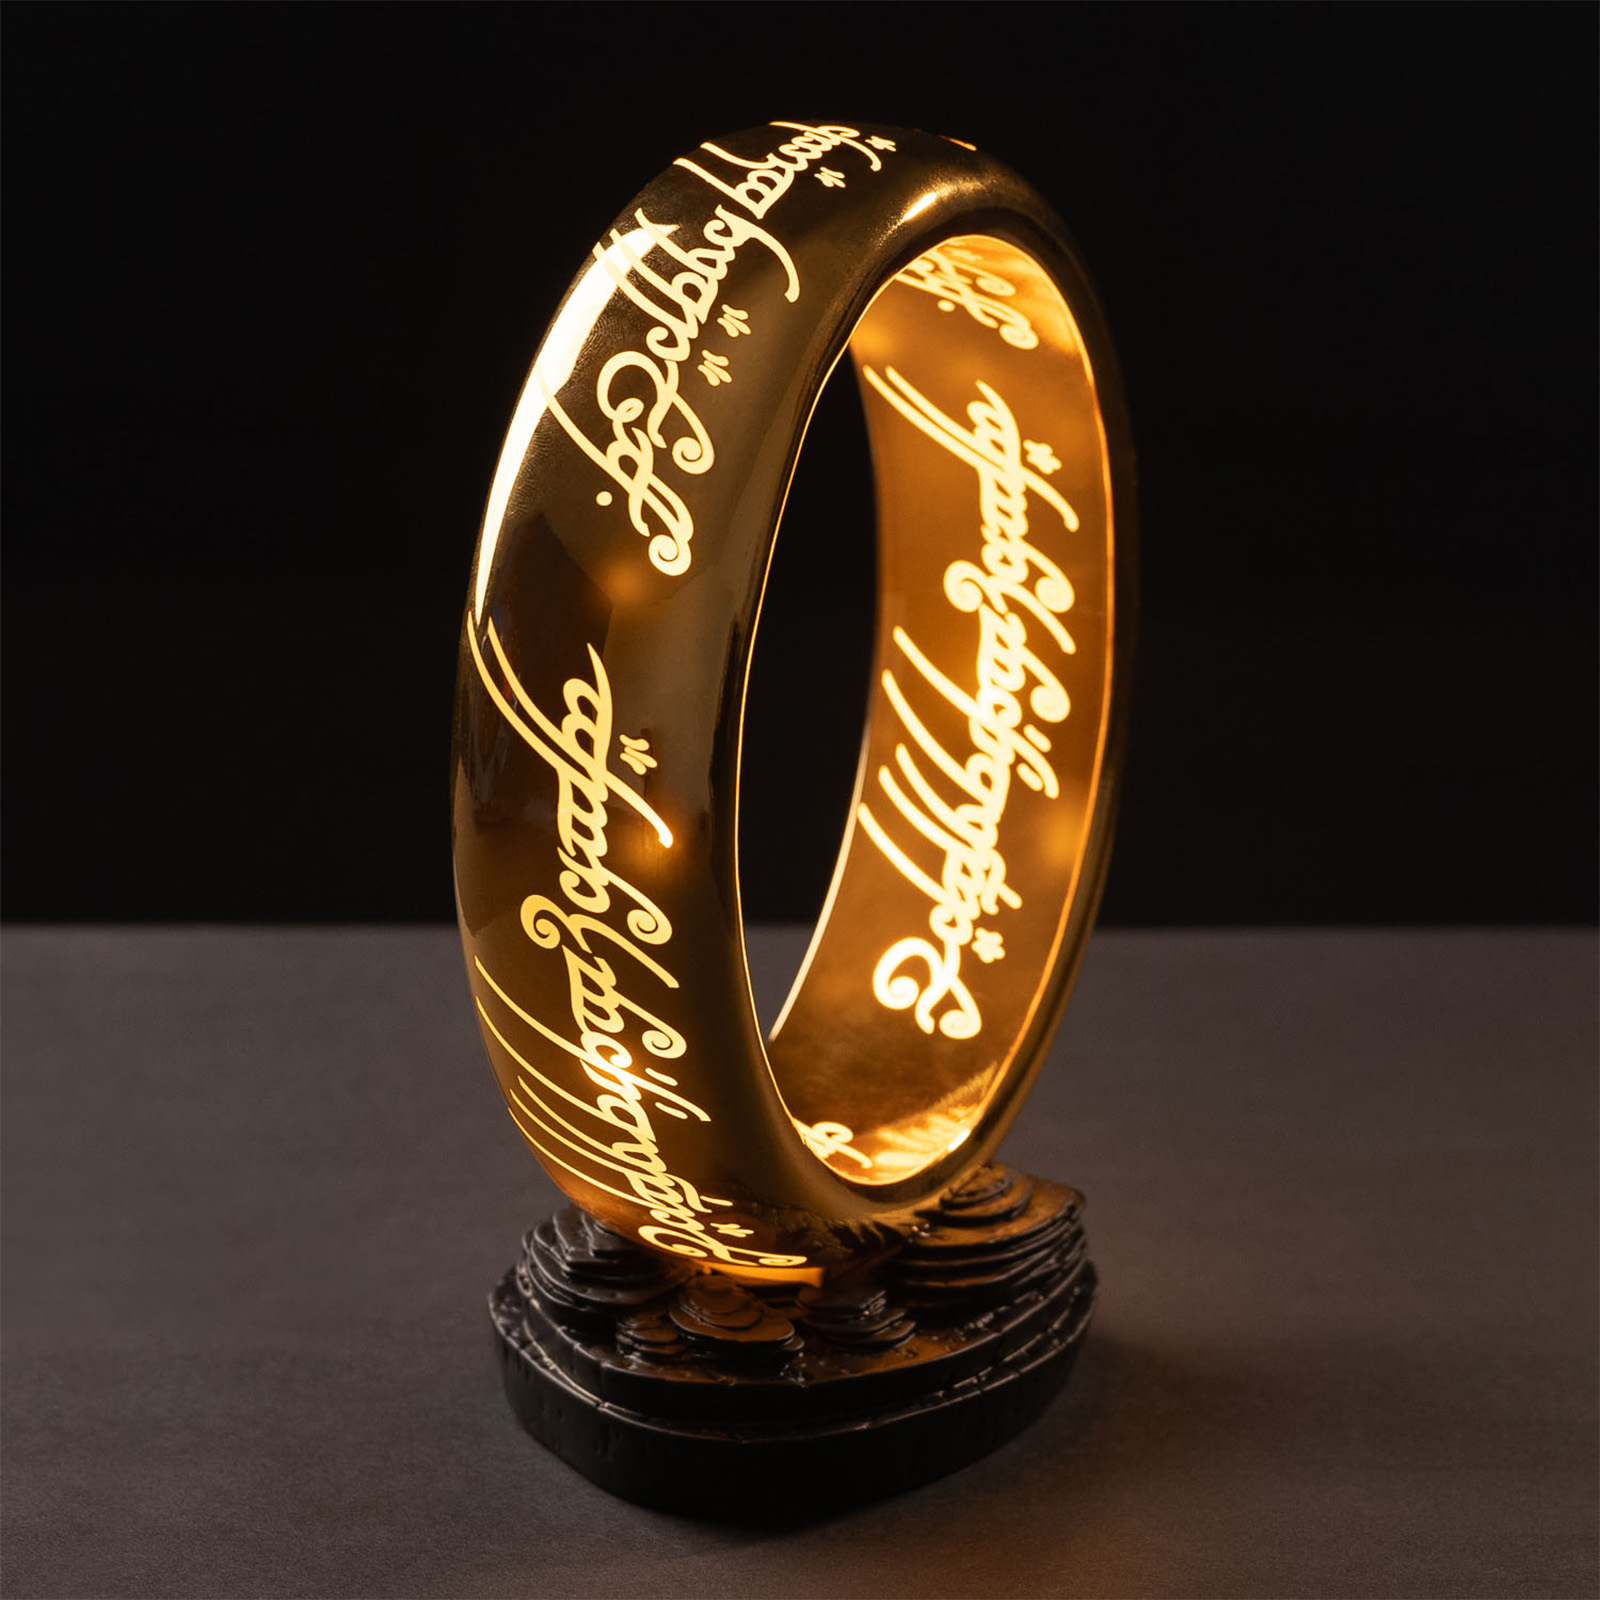 Image of Lord Of The Rings Replica One Ring Lamp